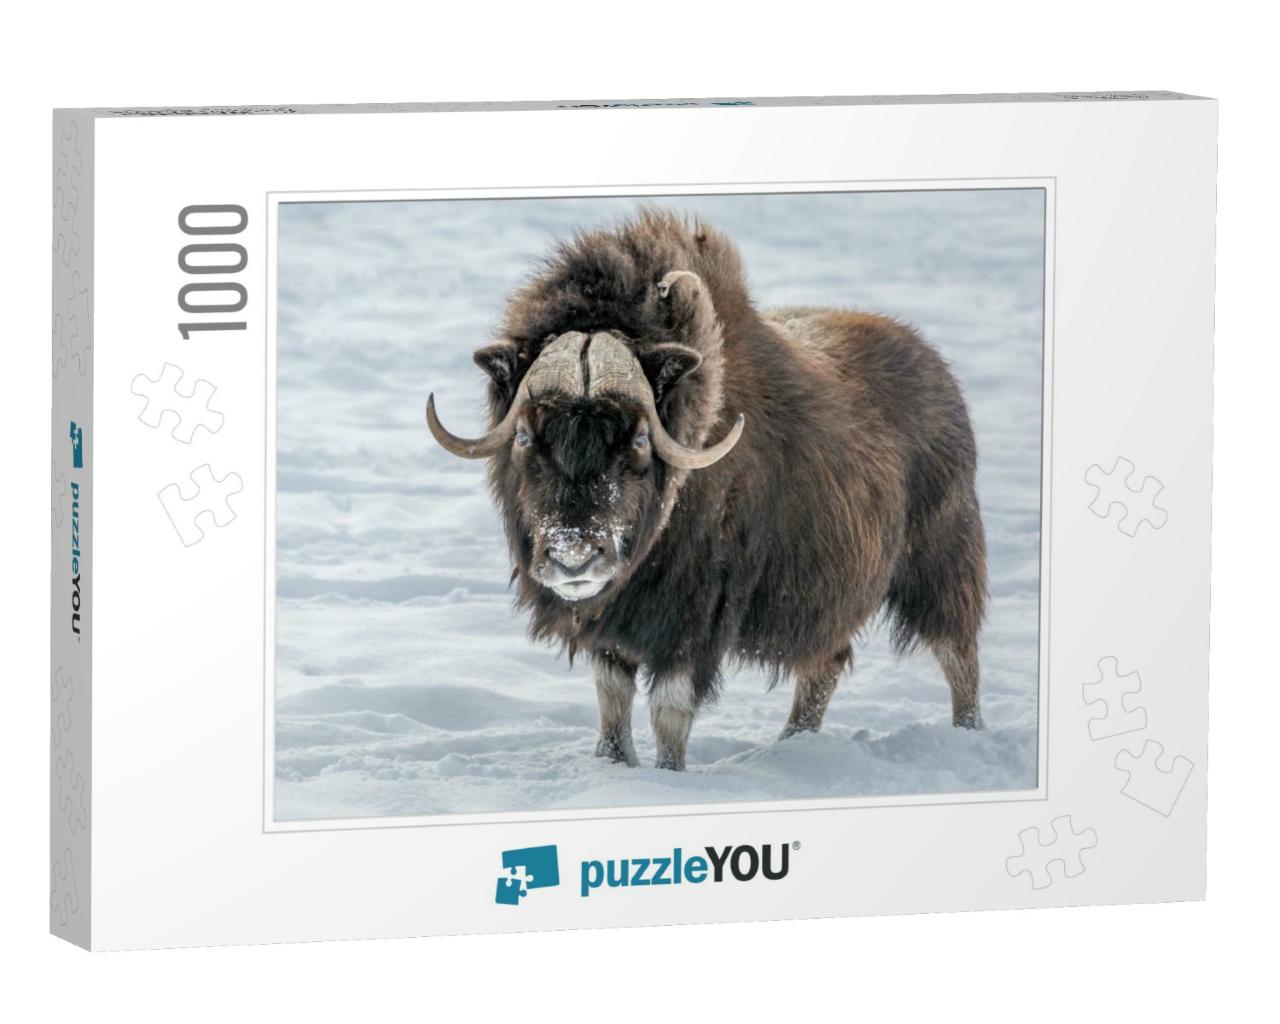 Muskox Looking in Your Eyes, Standing in the Snow... Jigsaw Puzzle with 1000 pieces